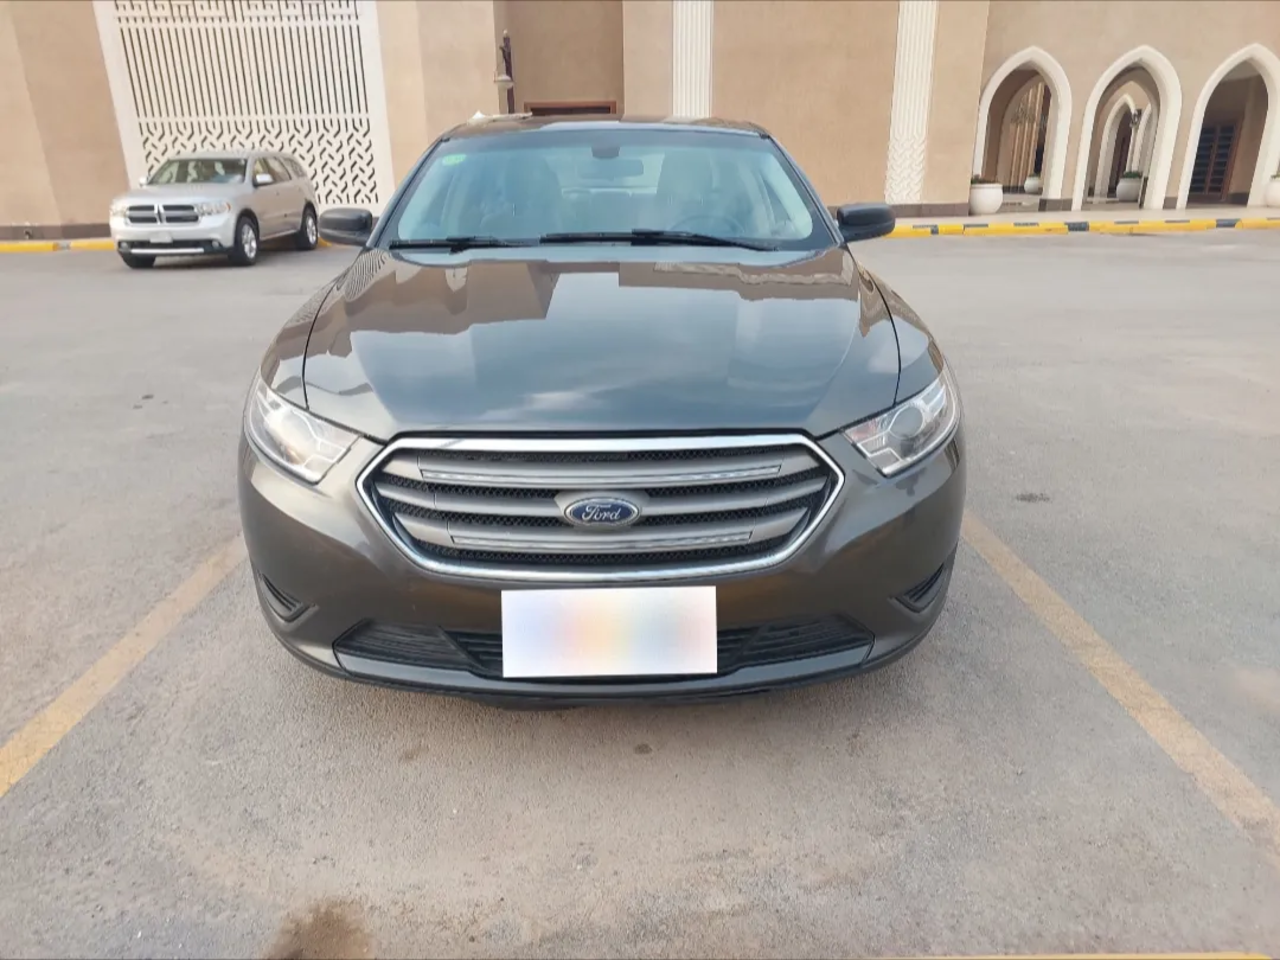 Ford Taurus, 2018, Automatic, 101713 KM, Phone Number (966563310310)